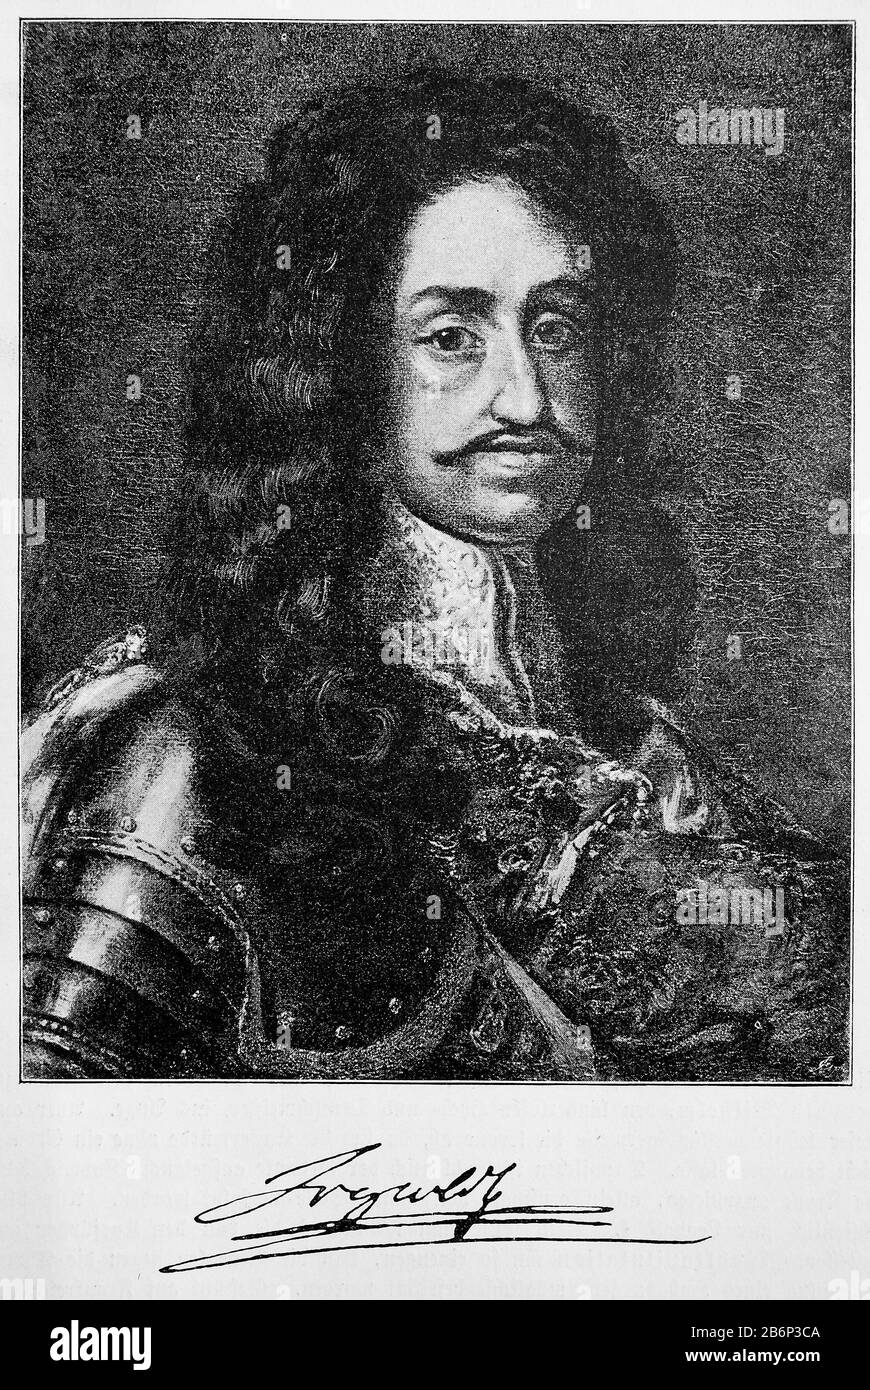 Leopold I, June 9, 1640 - May 5, 1705, from the House of Habsburg, born as Leopold Ignaz Joseph Balthasar Franz Felician, was emperor of the Holy Roman Empire from 1658 to 1705 and king in Germania (from 1654), Hungary (from 1655), Bohemia (from 1656), Croatia and Slavonia  /  Leopold I., 9. Juni 1640 - 5. Mai 1705, aus dem Hause Habsburg, geboren als Leopold Ignaz Joseph Balthasar Franz Felician, war von 1658 bis 1705 Kaiser des Heiligen Römischen Reiches sowie König in Germanien (ab 1654), Ungarn (ab 1655), Böhmen (ab 1656), Kroatien und Slawonien, Historisch, digital improved reproduction o Stock Photo